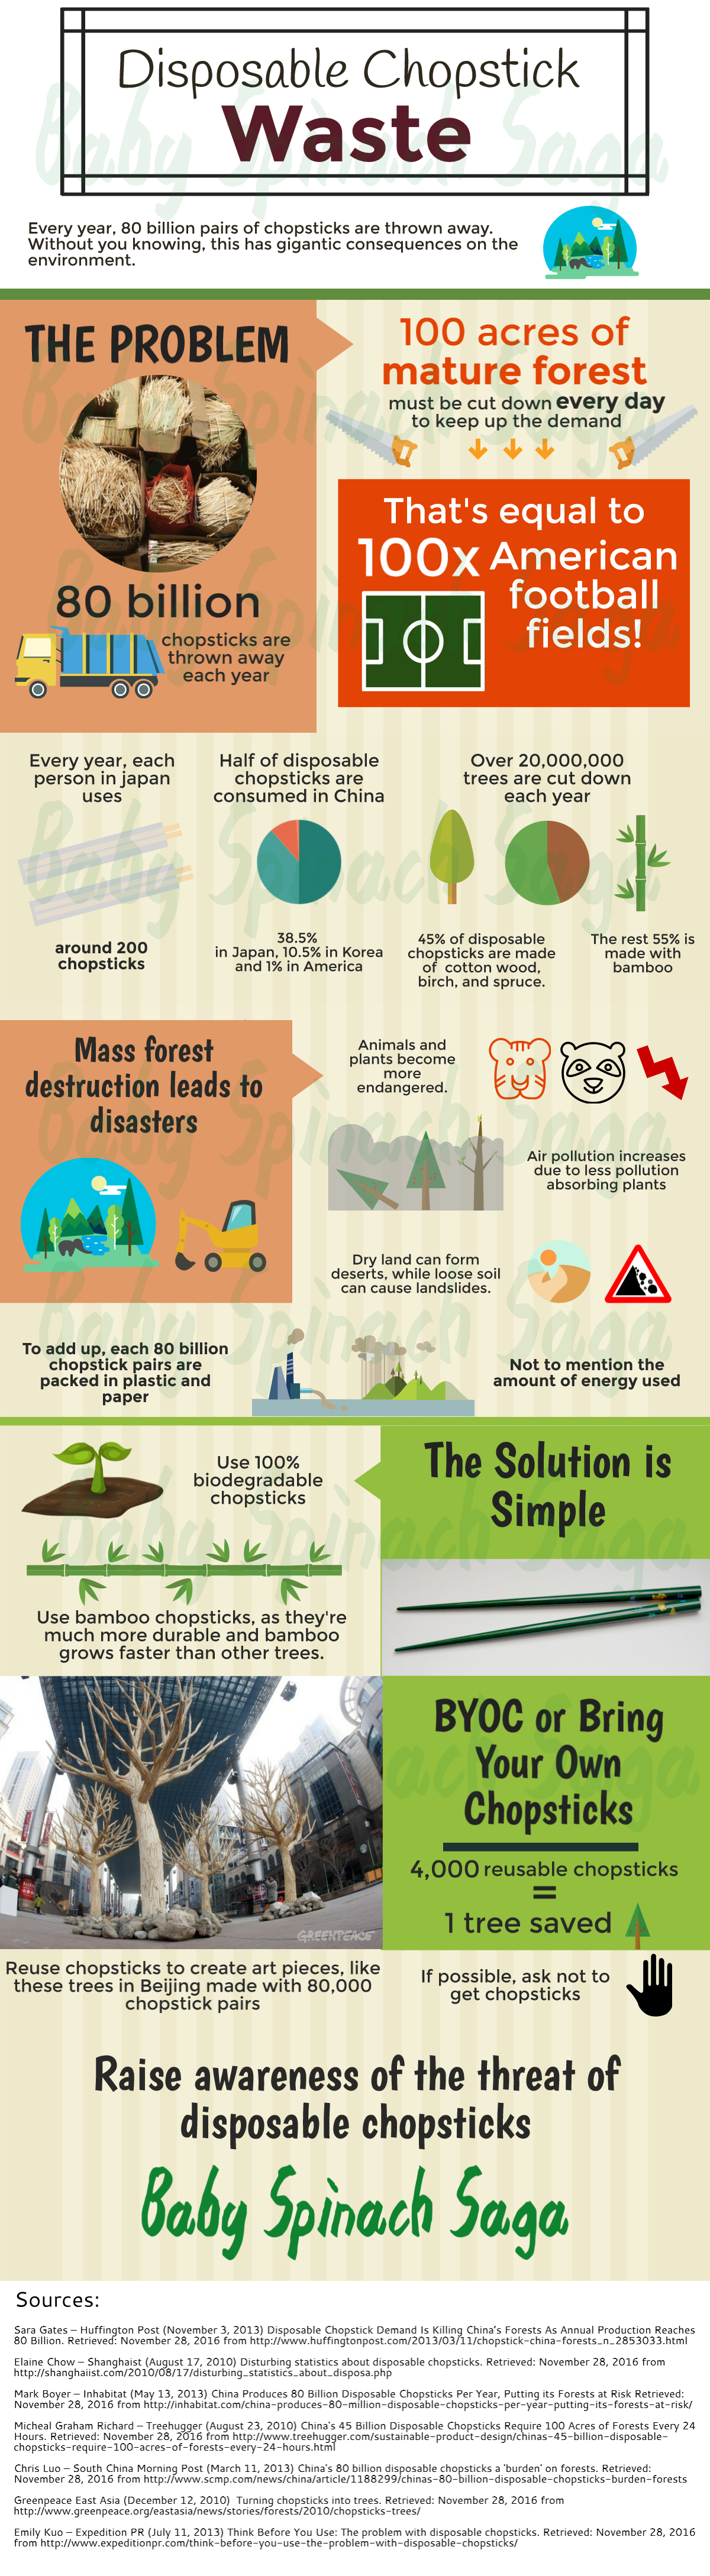 disposable-chopstick-waste-effect-infographic-baby-spinach-saga